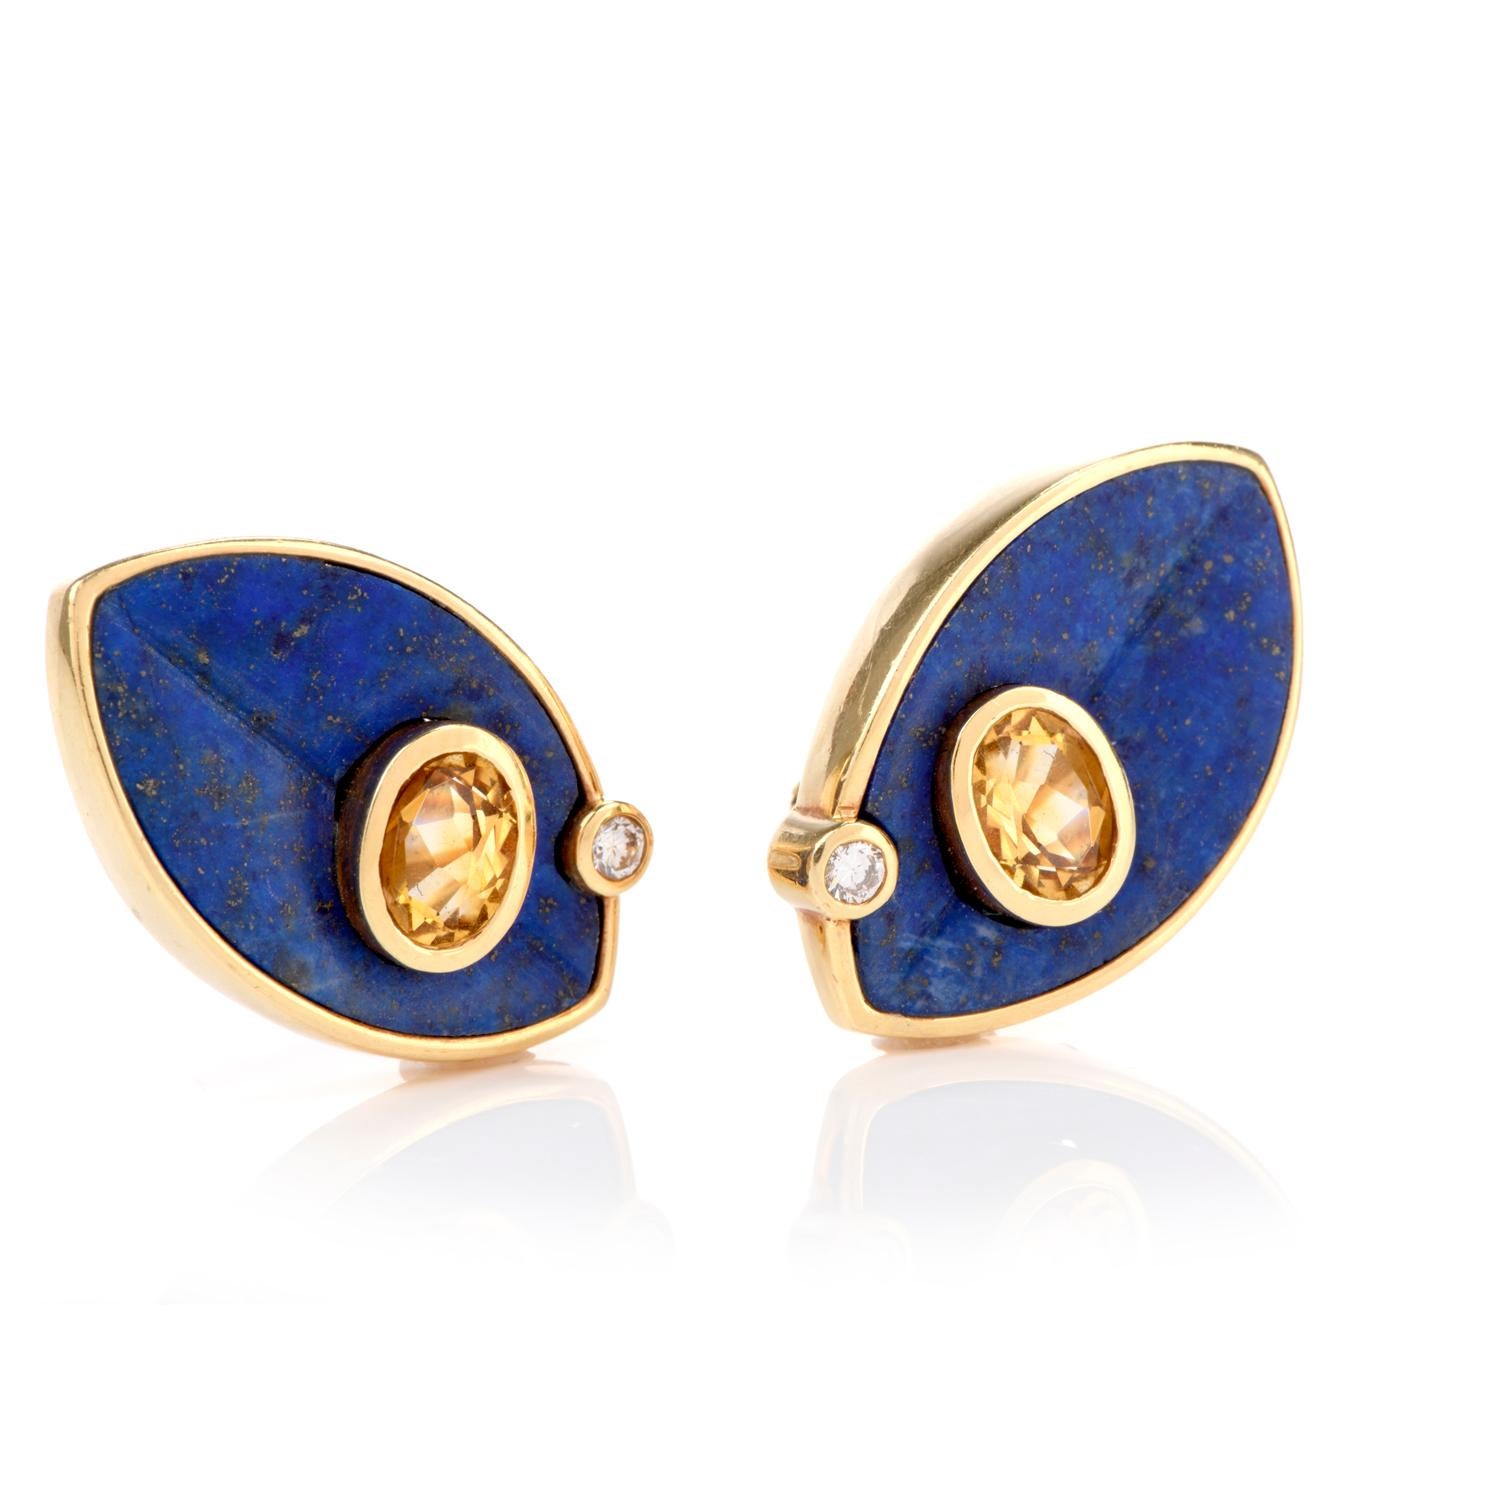 These Fashion Statement 1970's vintage Diamond Lapis and Citrine Clipon Earrings were inspired of an Abstract Geometrical pattern  and crafted in 18K gold. The elongated  marquise shaped Lapis immediately draws the eye to focus. Resting atop is a